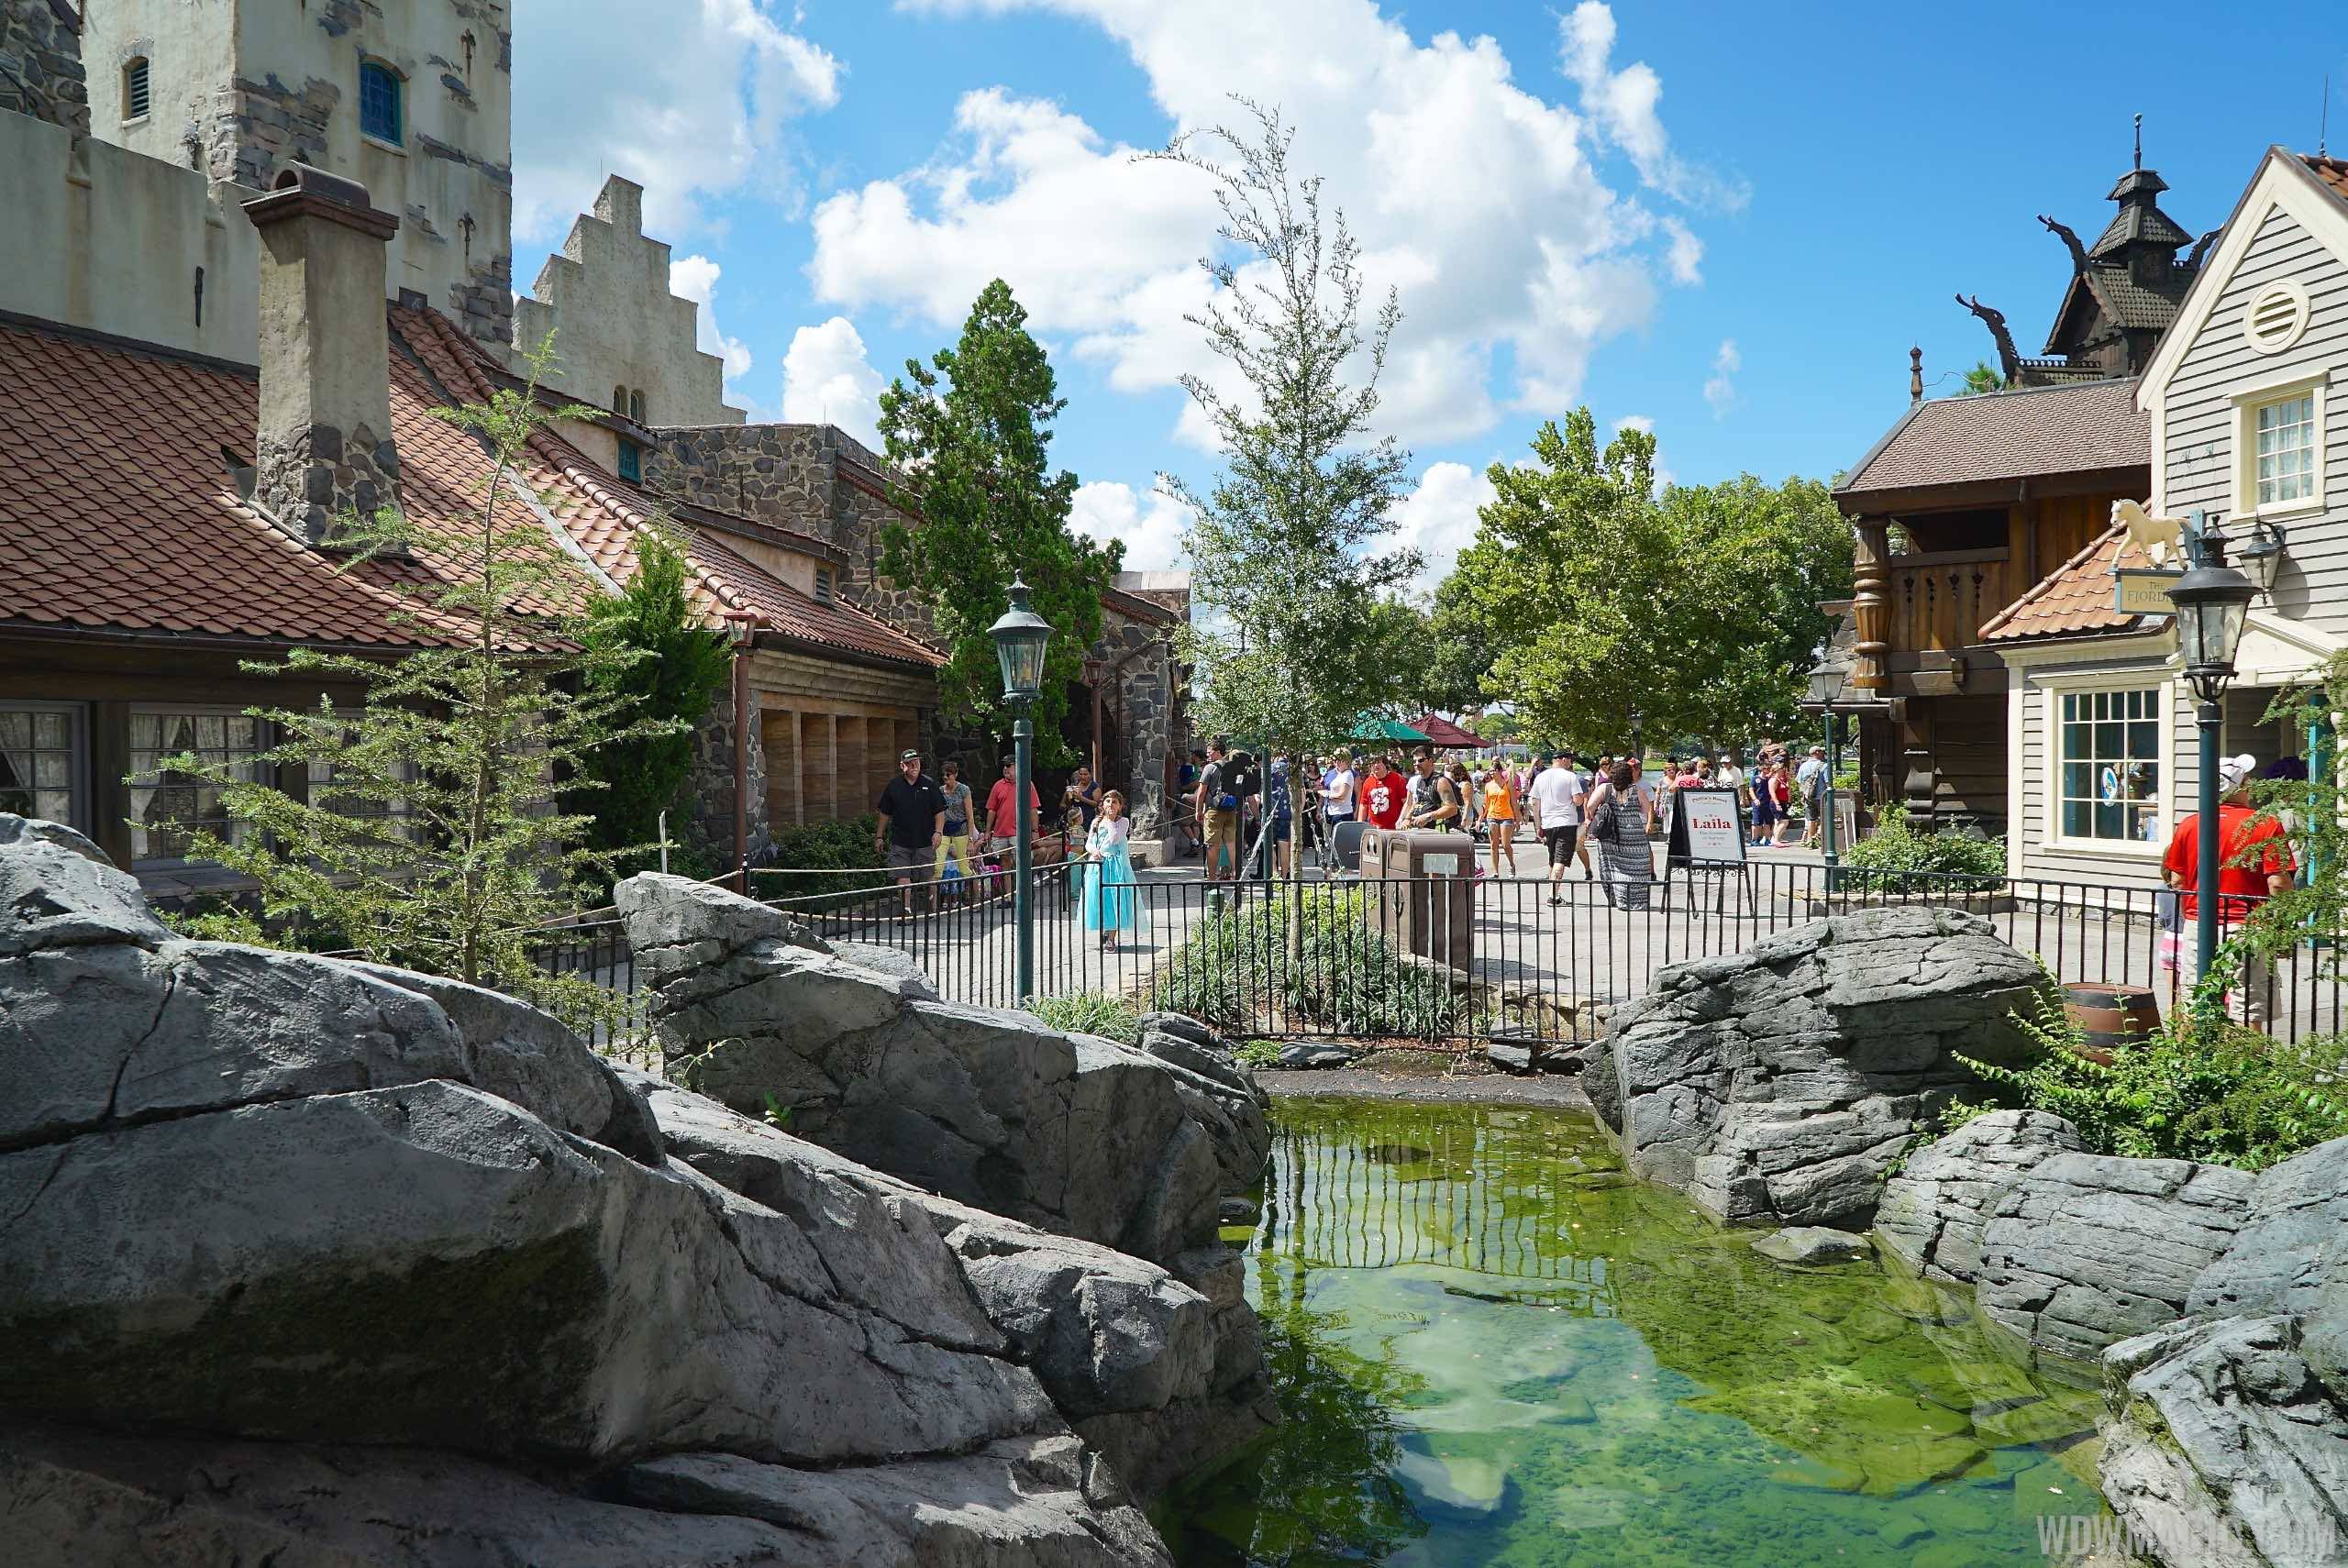 Norway Pavilion Frozen meet and greet to take place in the 'Royal Sommerhus'